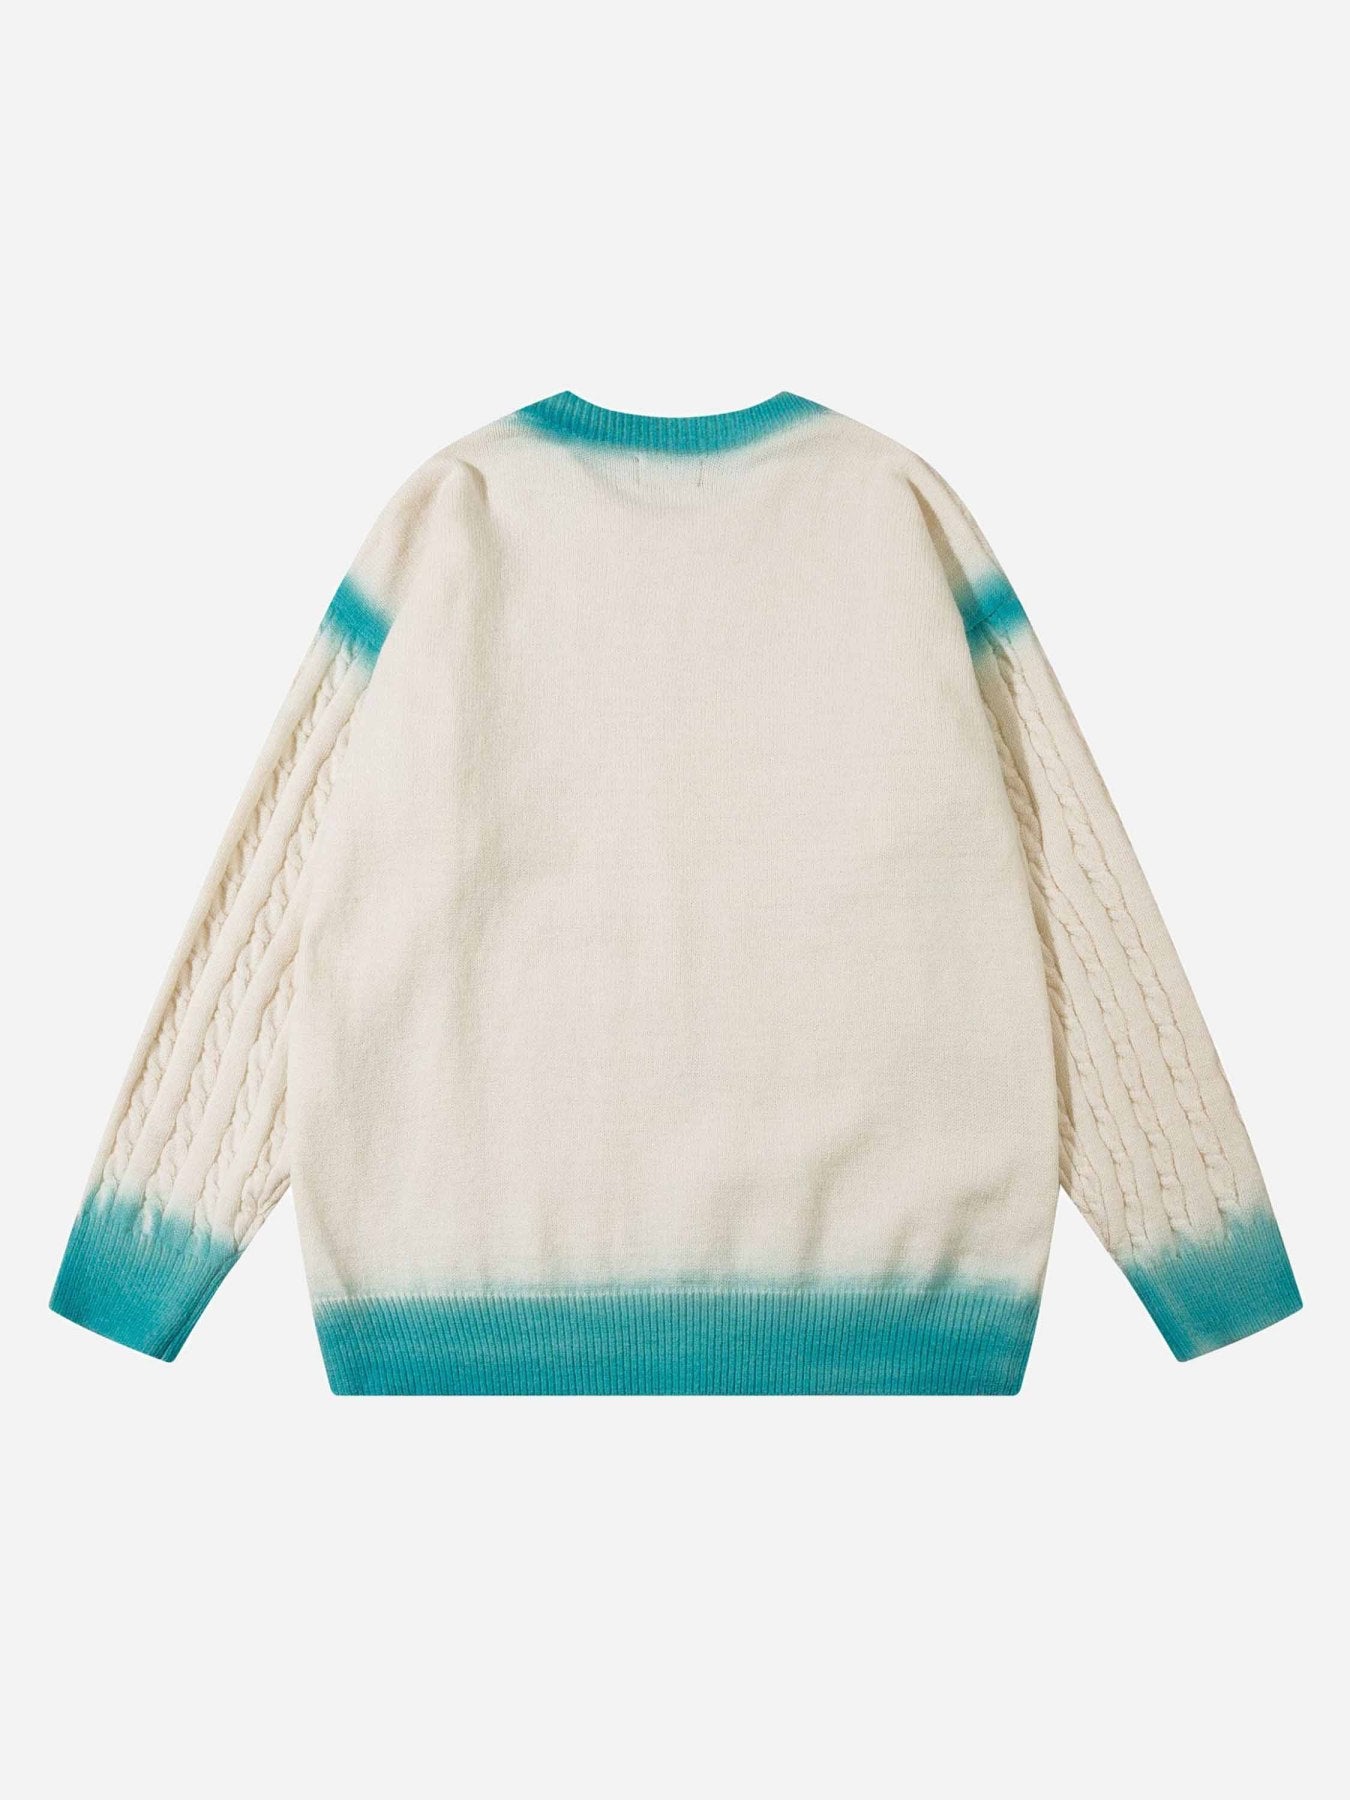 The Supermade Star Loose Sweater